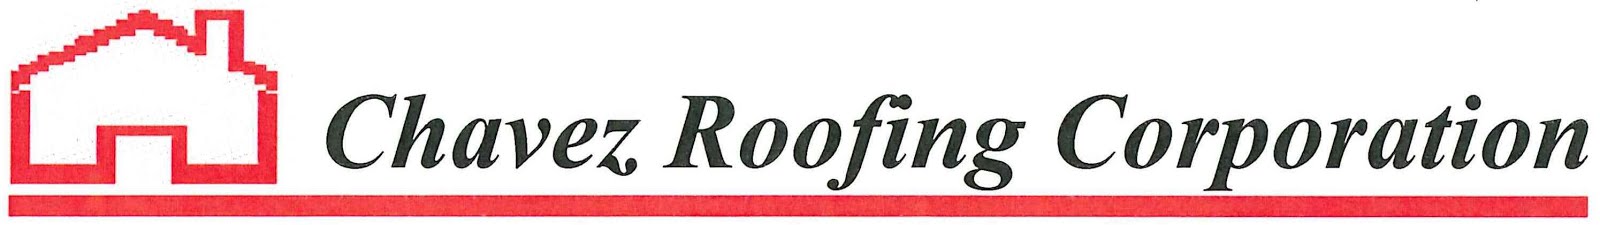 Chavez Roofing Corporation